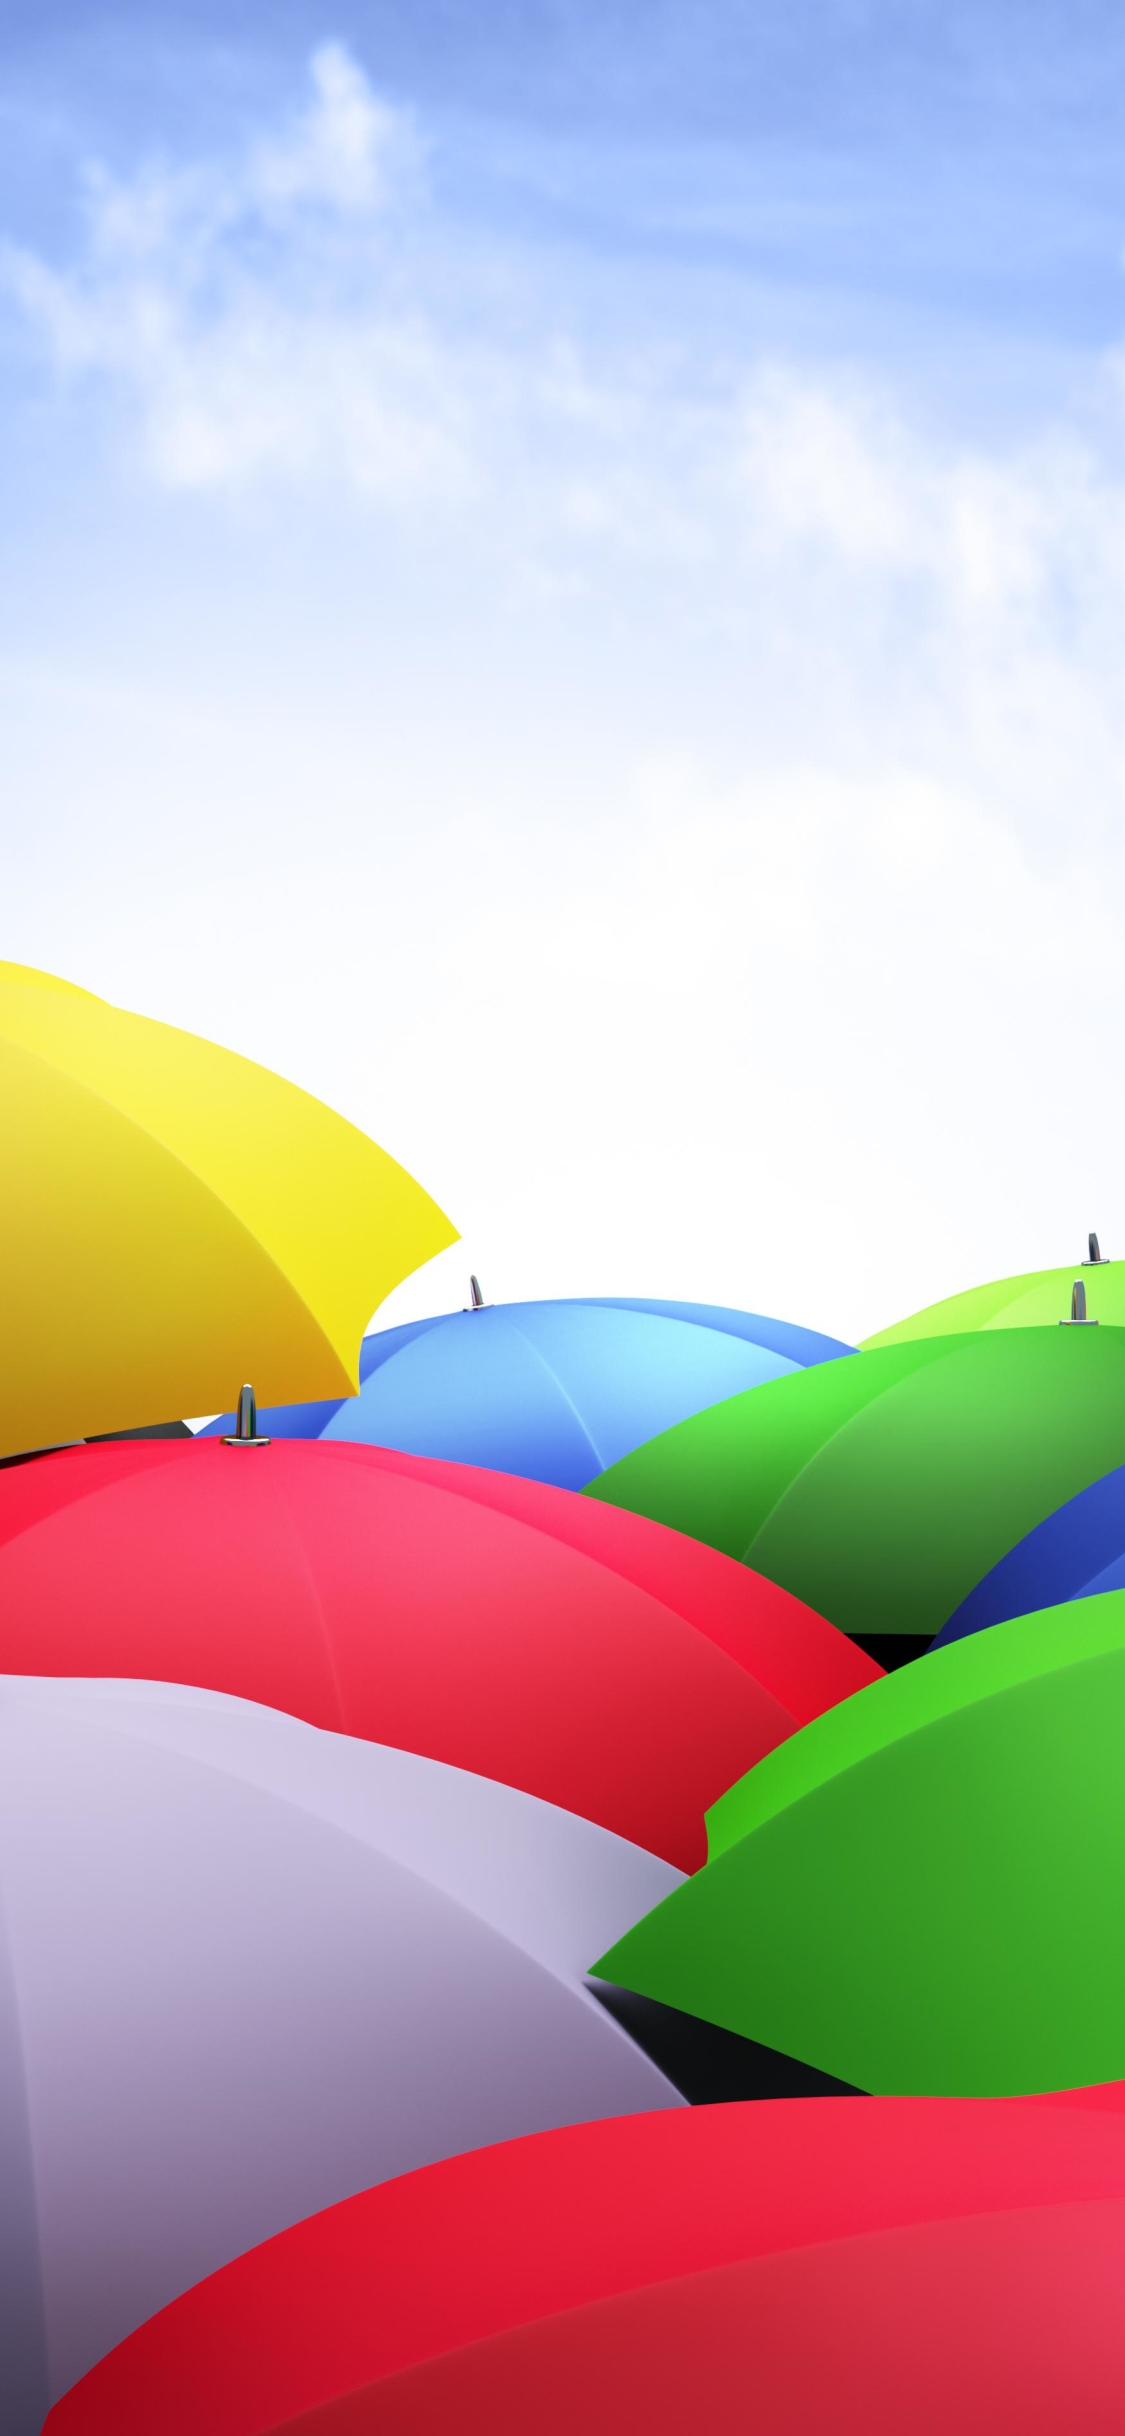 Colorful Umbrellas - Mobile Abyss